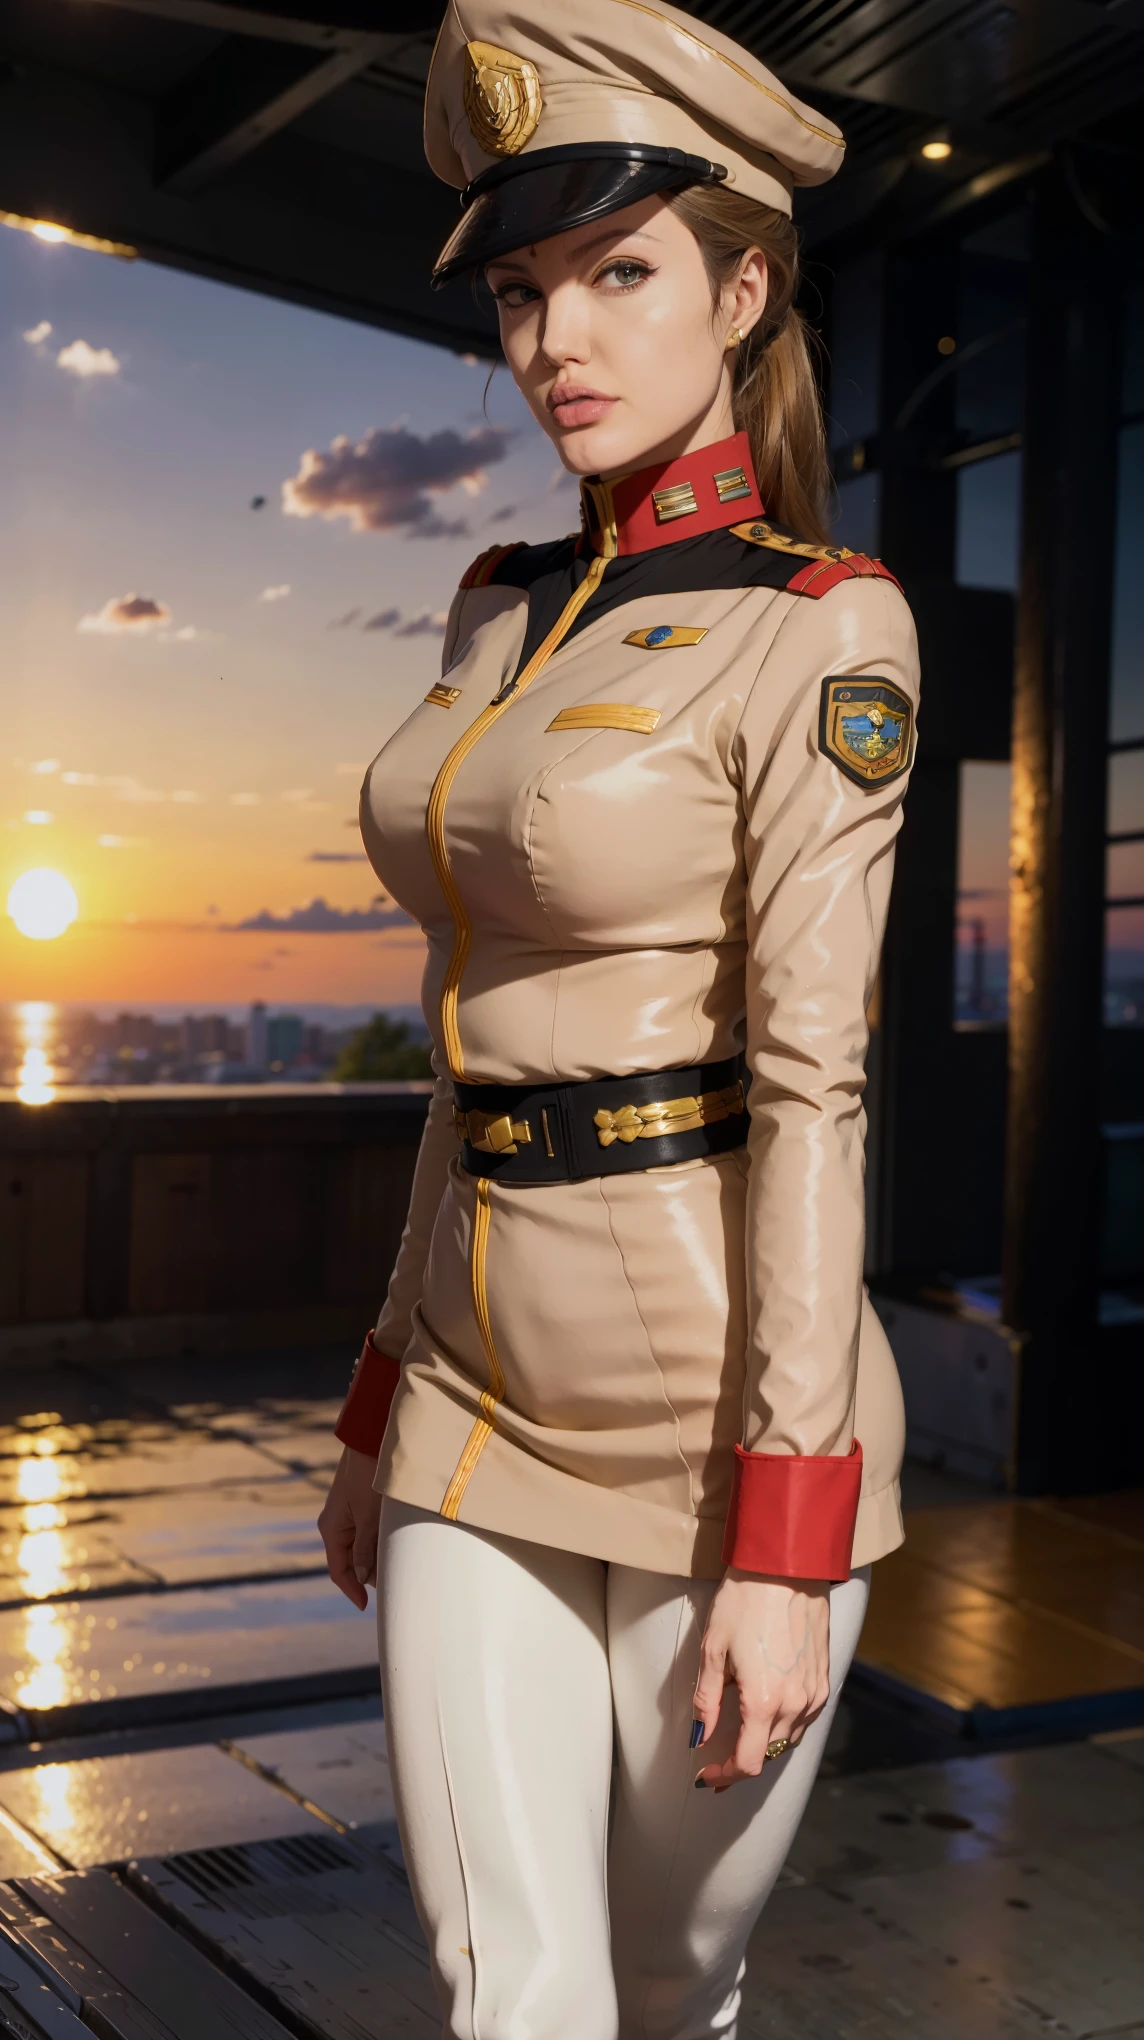 (((masterpiece,highest quality,In 8K,super detailed,High resolution,anime style,Absolutely))),(A female Earth Federation Forces officer is walking.:1.5),(solo:1.5),((ten-hut:1.5)),(Angelina jolie:1.5),((The background is a big sunset:1.5)),((blur background:1.5))),BREAK (Wearing the uniform of the Earth Federation Forces:1.5),(Wearing a federal officer&#39;s hat:1.5),(Beautiful woman:1.4),(Detailed facial depiction:1.4),(beautiful hands:1.4),(detailed hands:1.2),(wallpaper:1.5),(whole body:1.5),(From above:1.5)